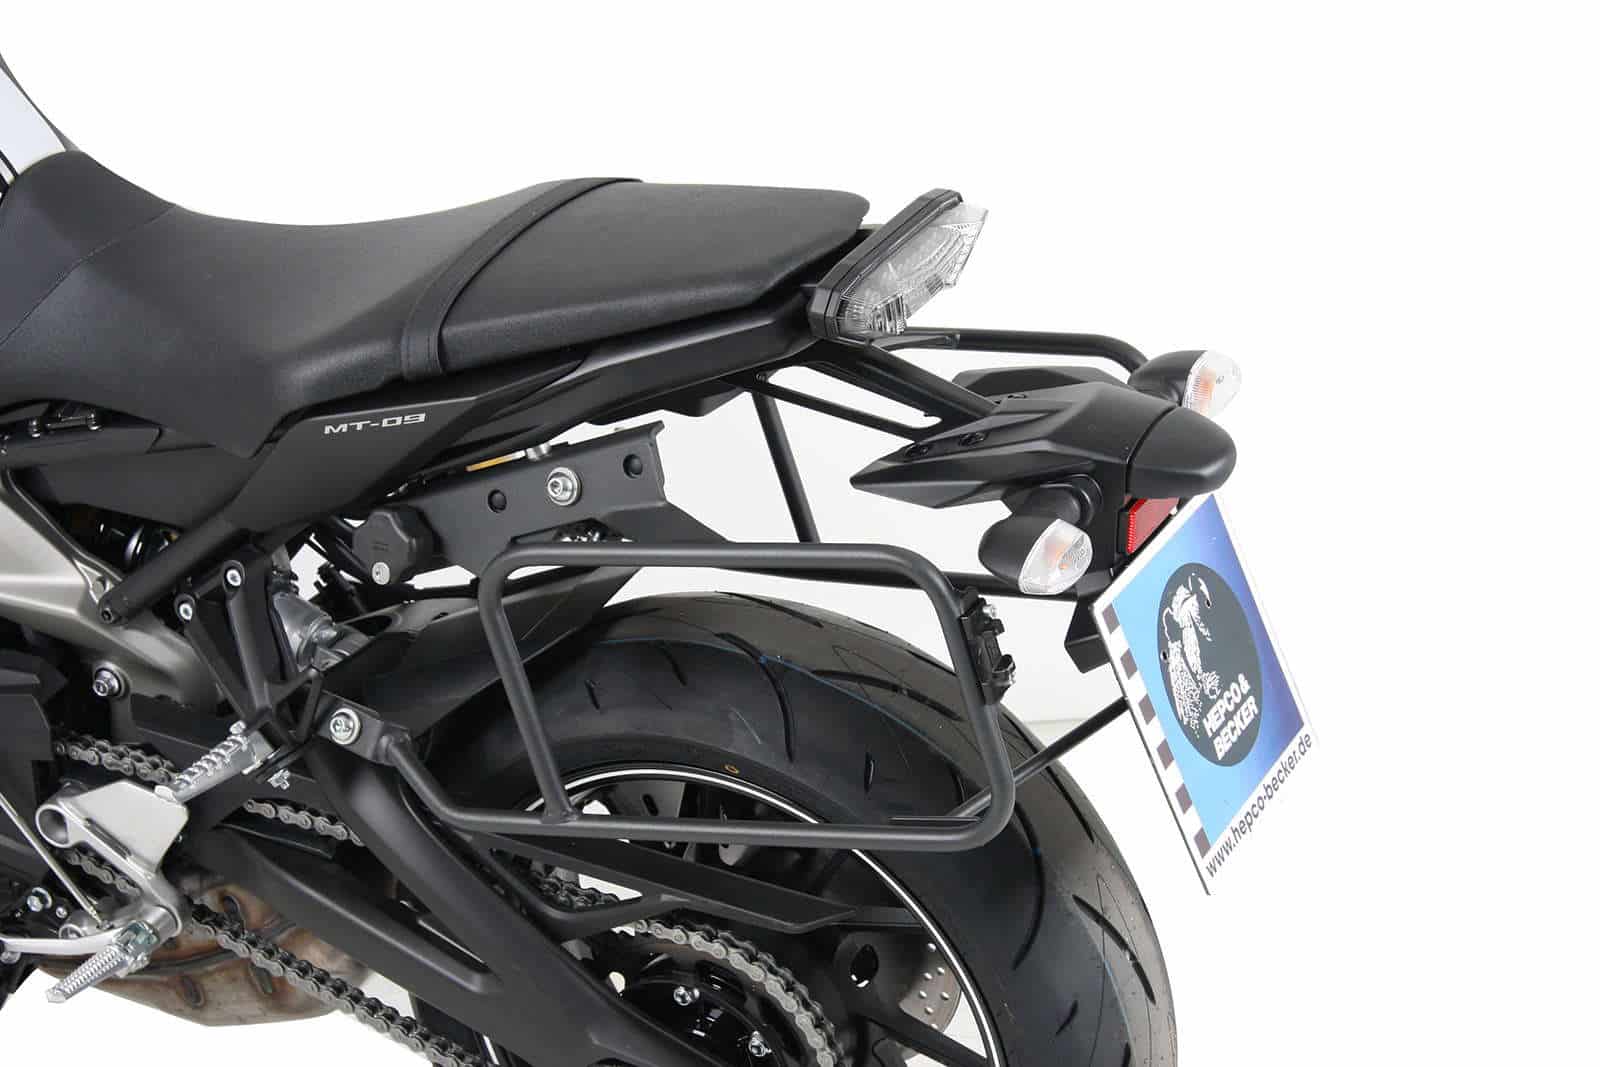 Sidecarrier Lock-it anthracite for Yamaha MT-09 (2013-2016)